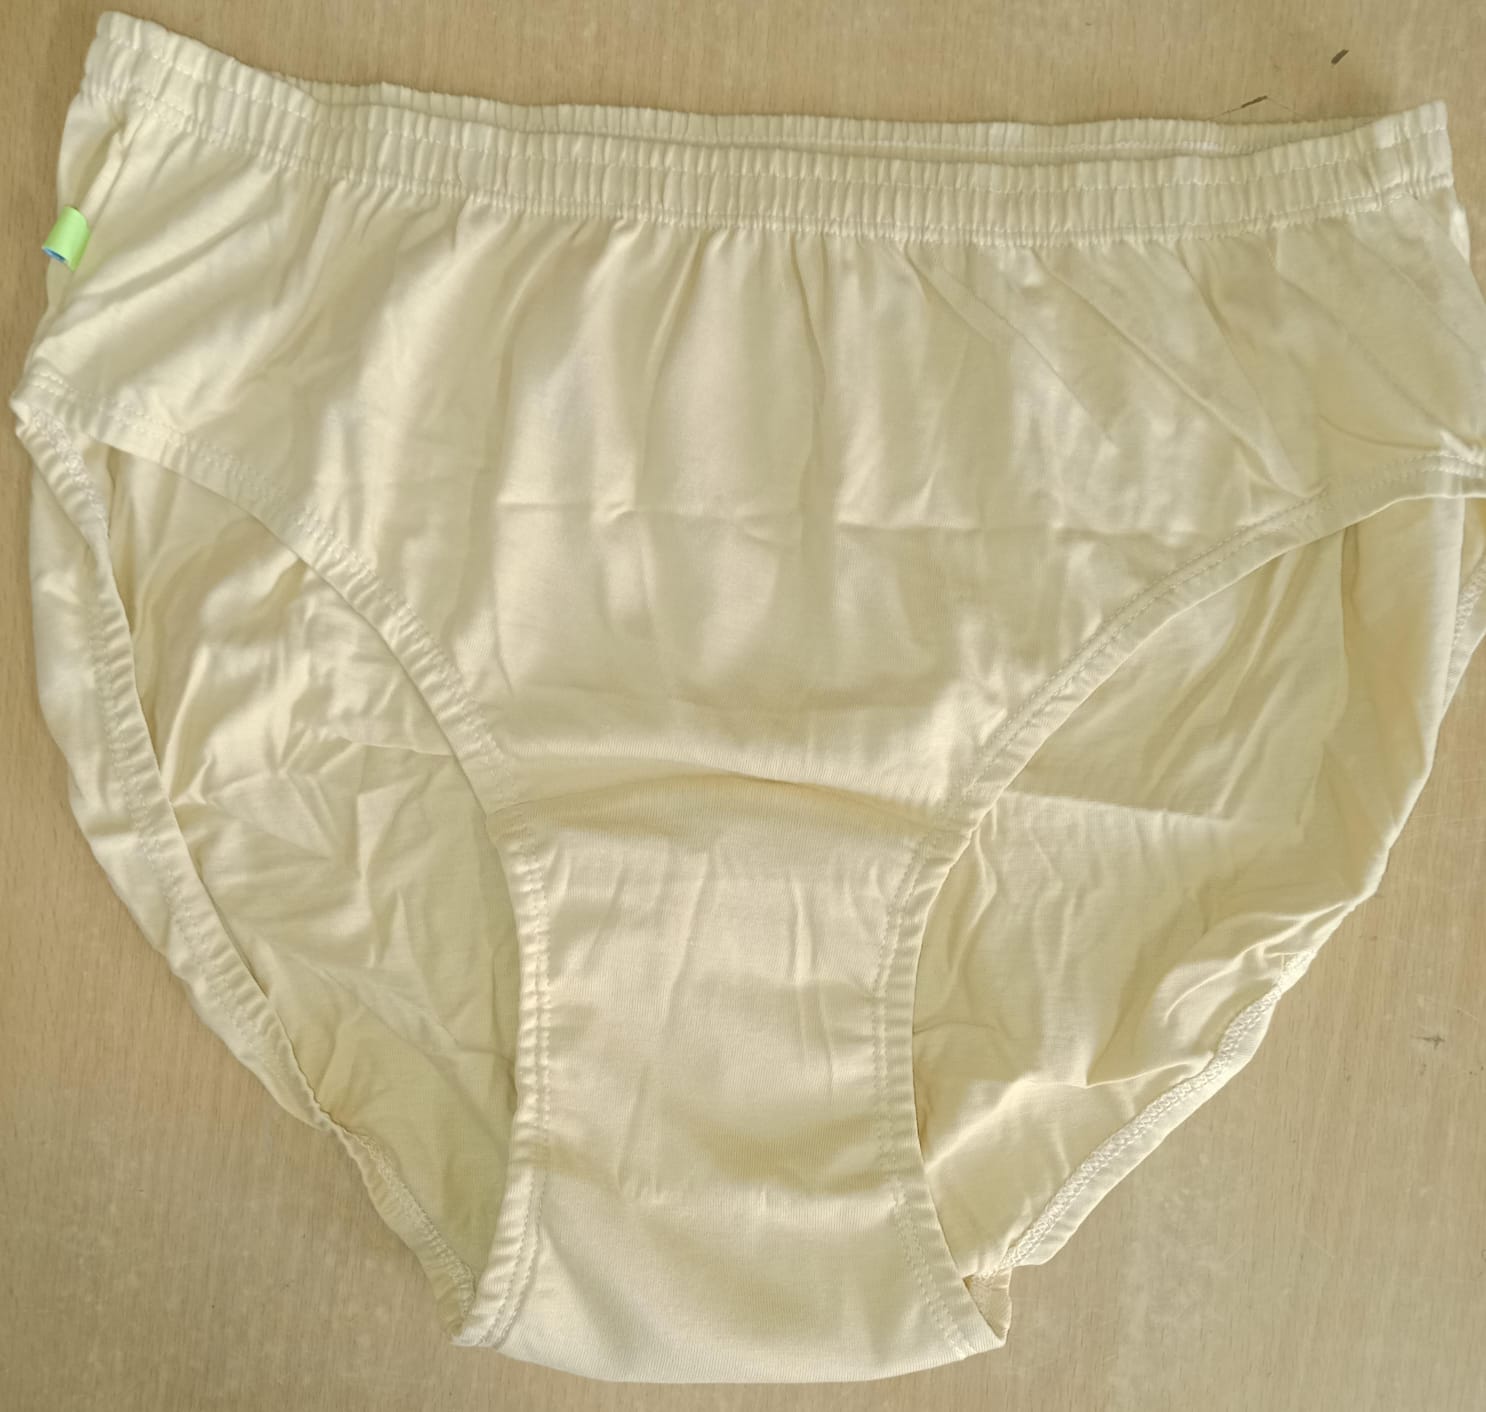 Discover Urinary Incontinence Panty For Women Reusable